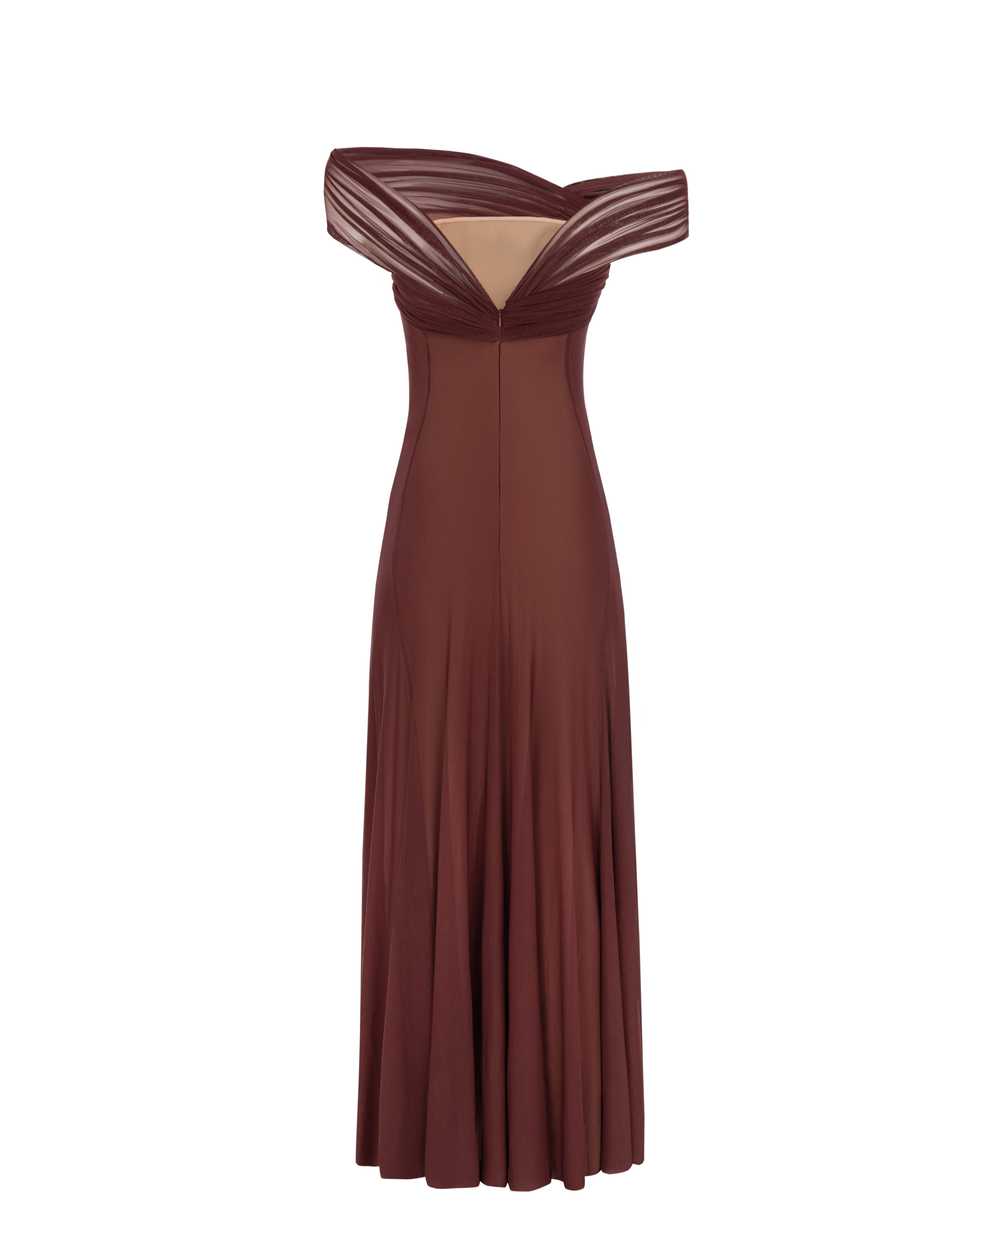 Milla Second-skin maxi dress in chocolate color - image 3